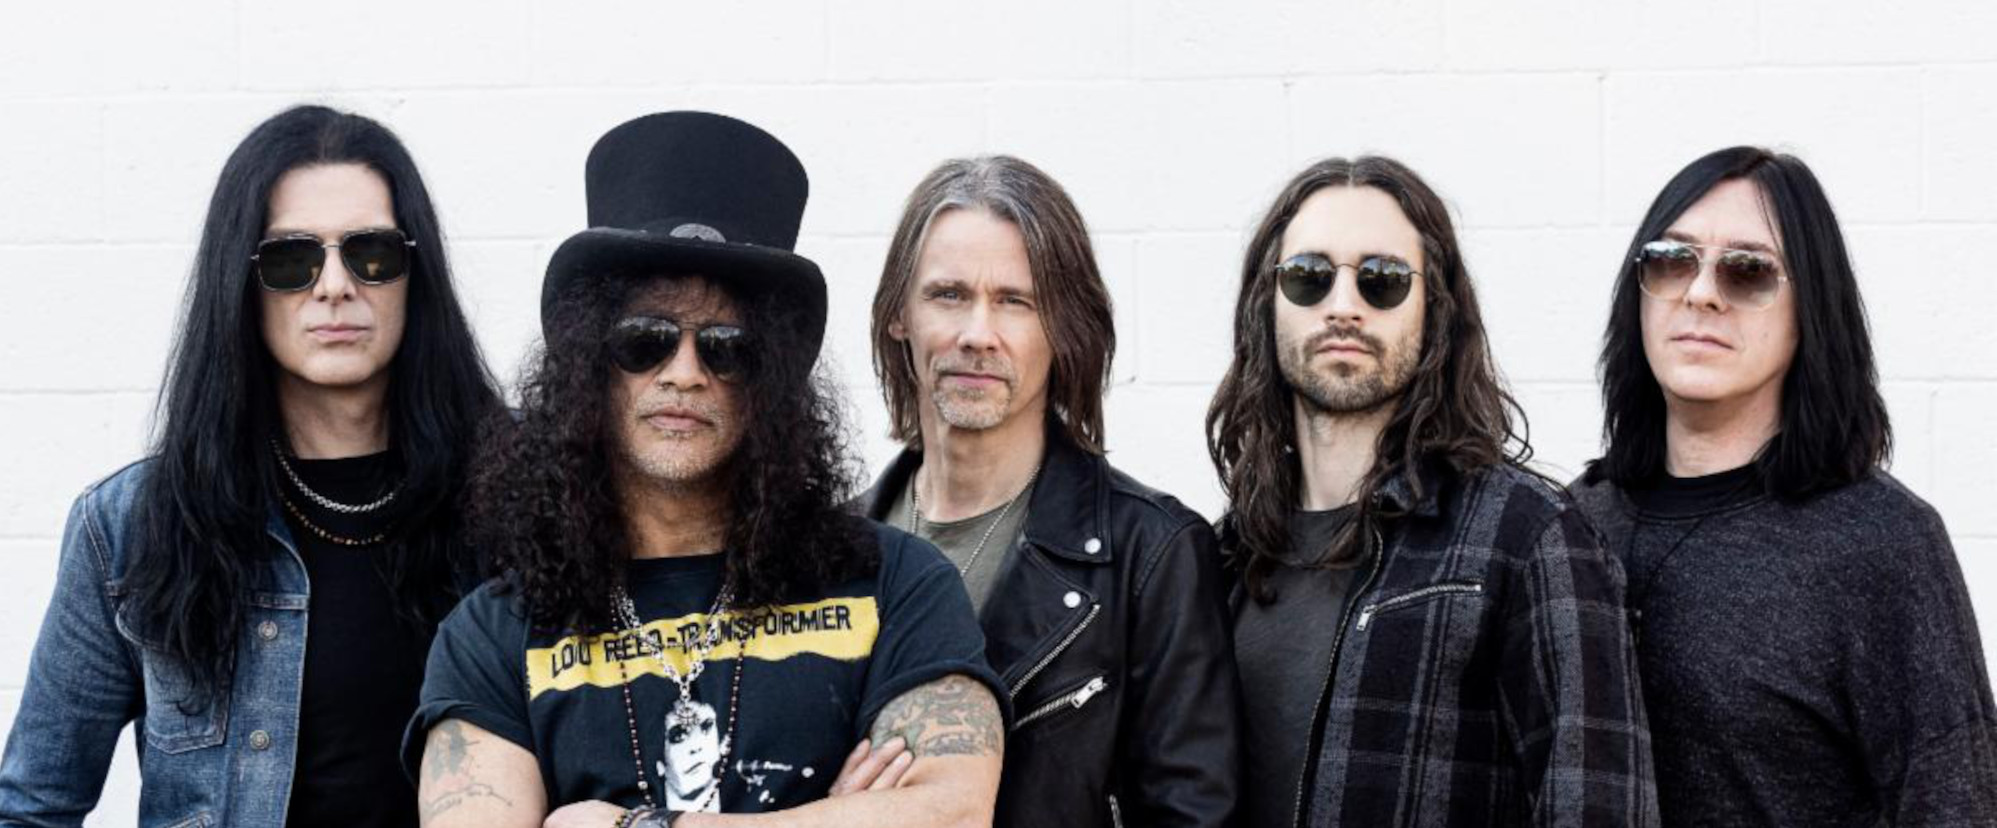 Slash Featuring Myles Kennedy & the Conspirators Announce Streaming Event, Release Single “April Fool”